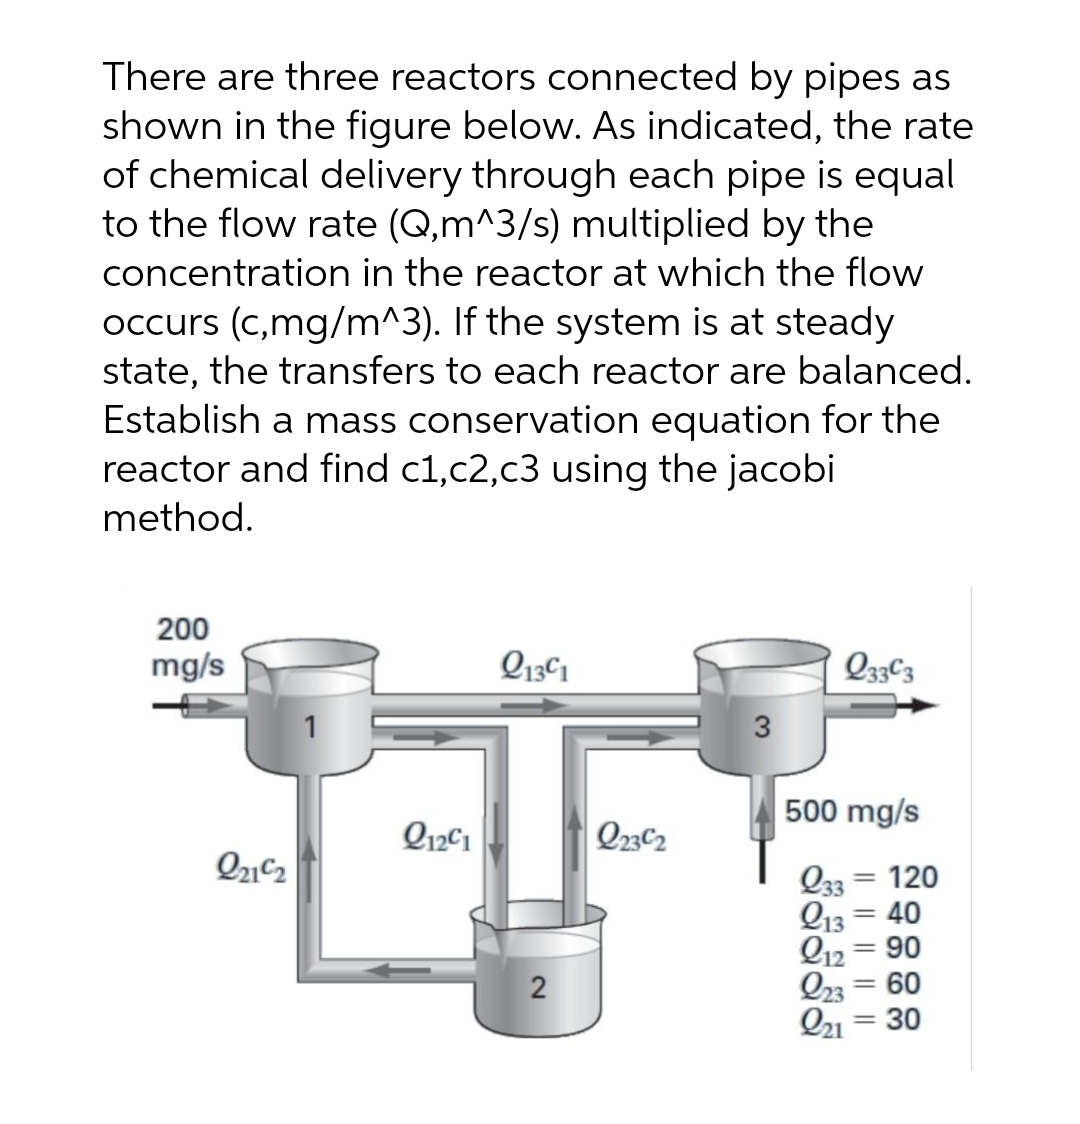 There are three reactors connected by pipes as
shown in the figure below. As indicated, the rate
of chemical delivery through each pipe is equal
to the flow rate (Q,m^3/s) multiplied by the
concentration in the reactor at which the flow
occurs (c,mg/m^3). If the system is at steady
state, the transfers to each reactor are balanced.
Establish a mass conservation equation for the
reactor and find c1,c2,c3 using the jacobi
method.
200
mg/s
221²₂
21291
Q1341
2
Q23C2
3
Q333
500 mg/s
Q33
213 = 40
212 = 90
223 = 60
221 = 30
-
120